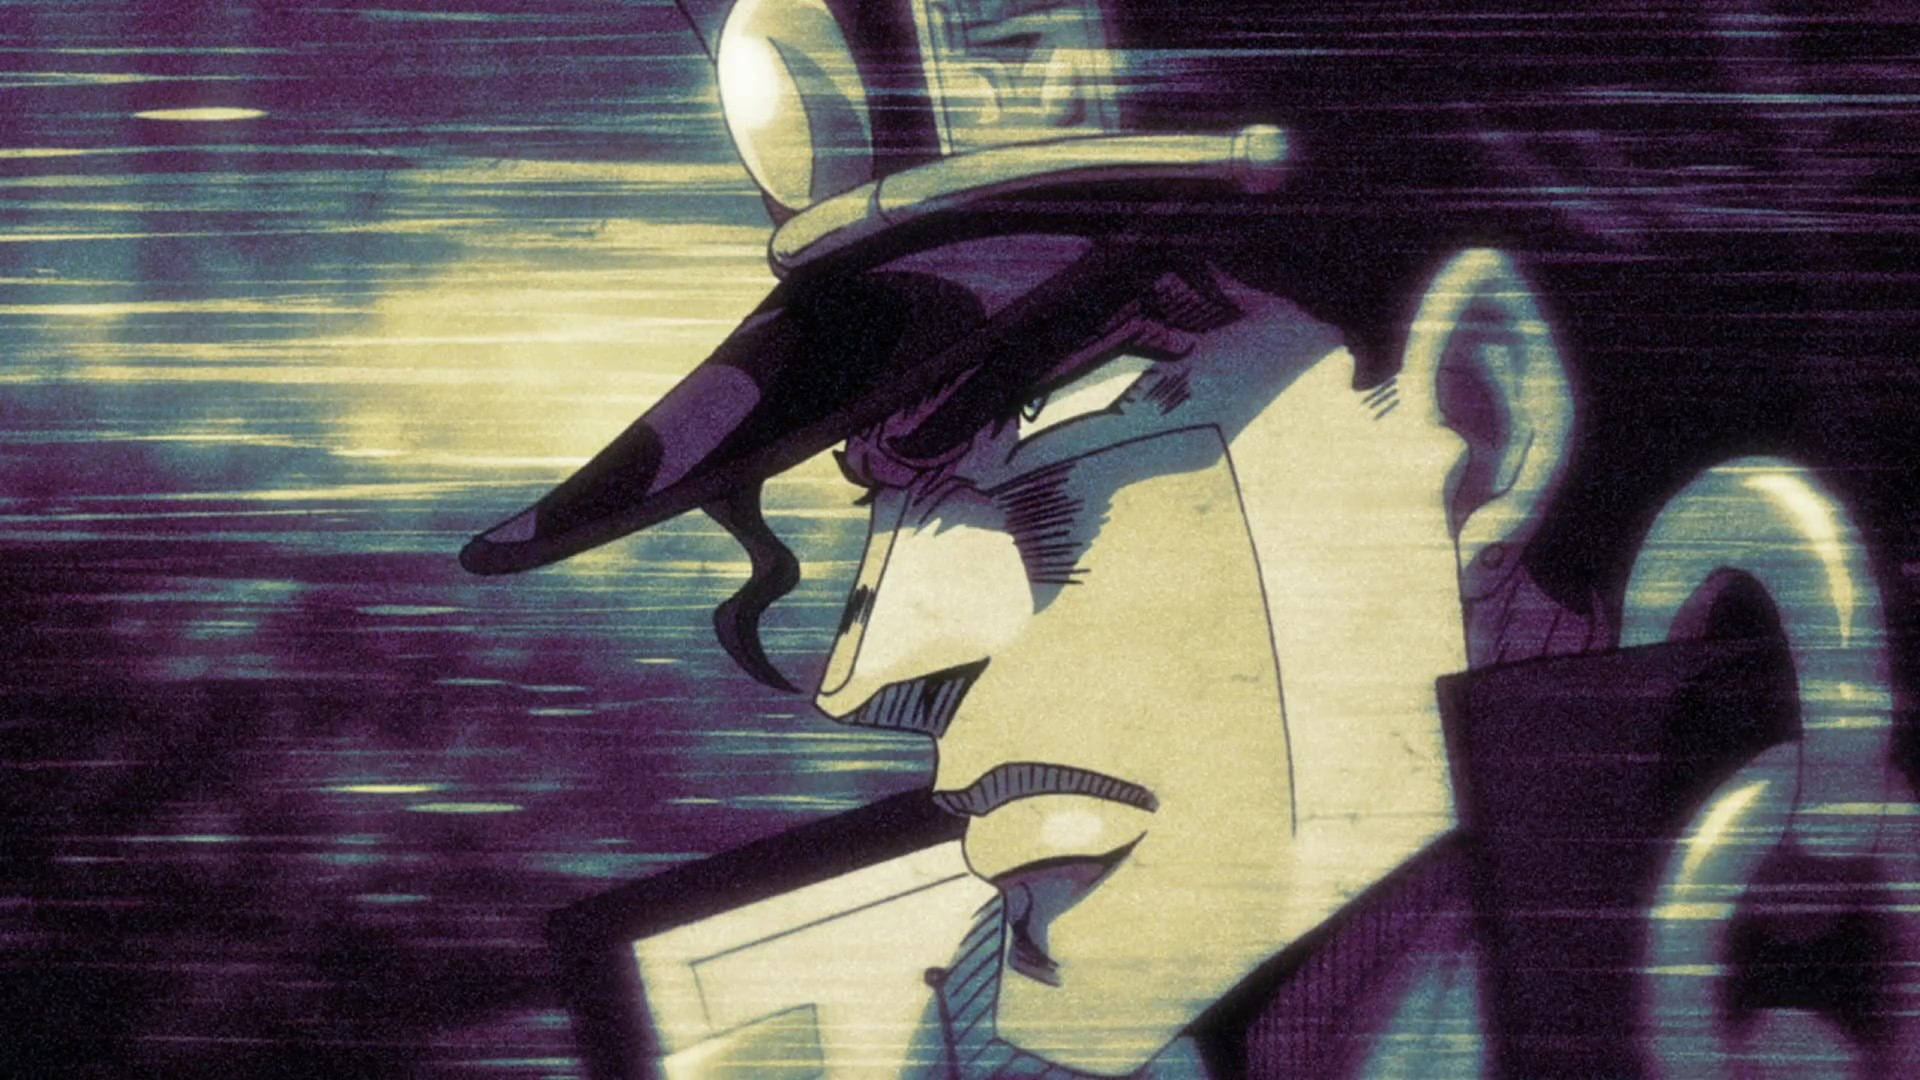 Jotaro Kujo Using His Fighting Power To Protect His Friends And Family. Wallpaper